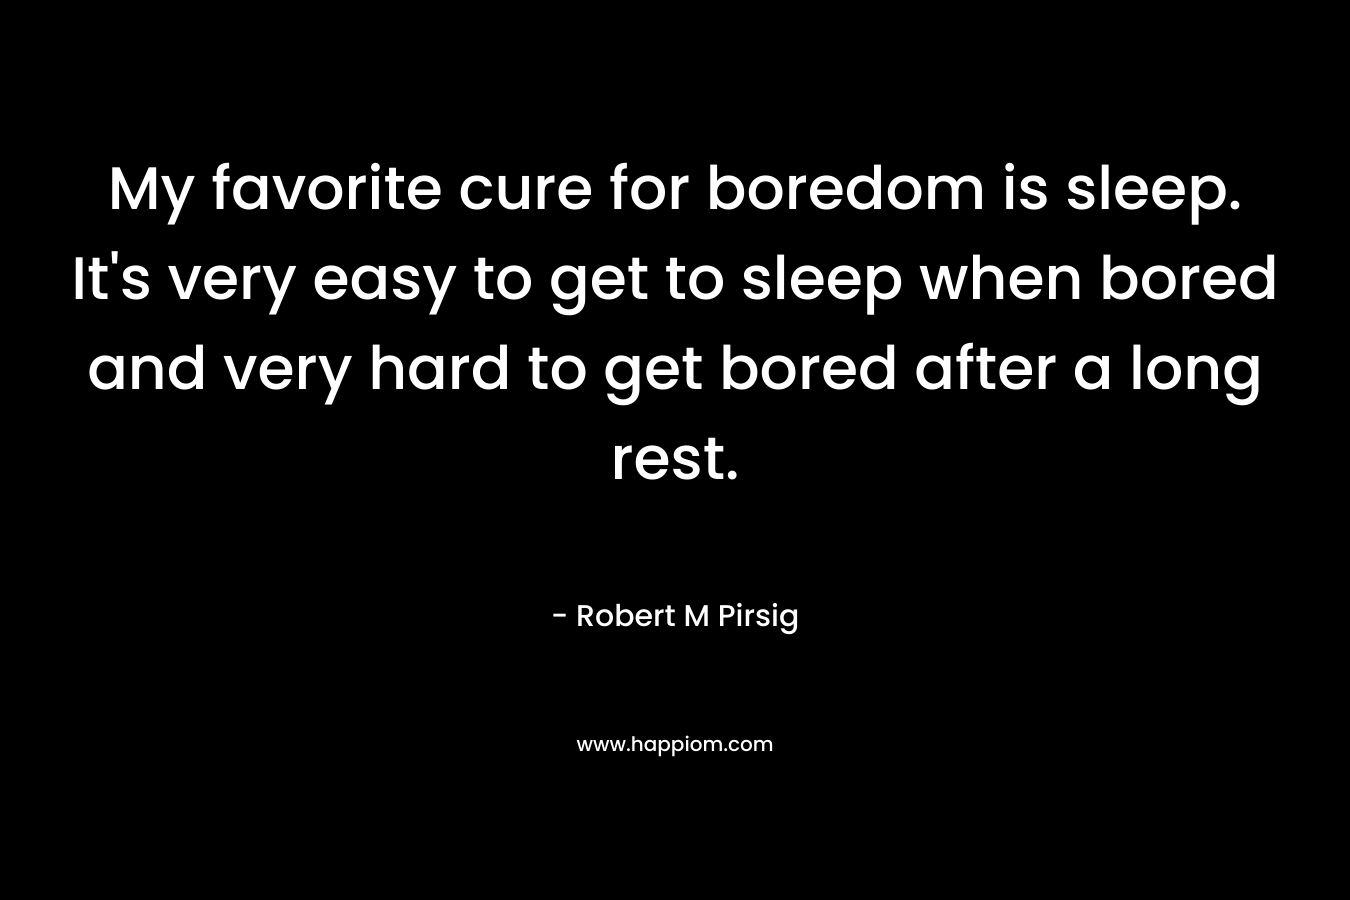 My favorite cure for boredom is sleep. It's very easy to get to sleep when bored and very hard to get bored after a long rest.